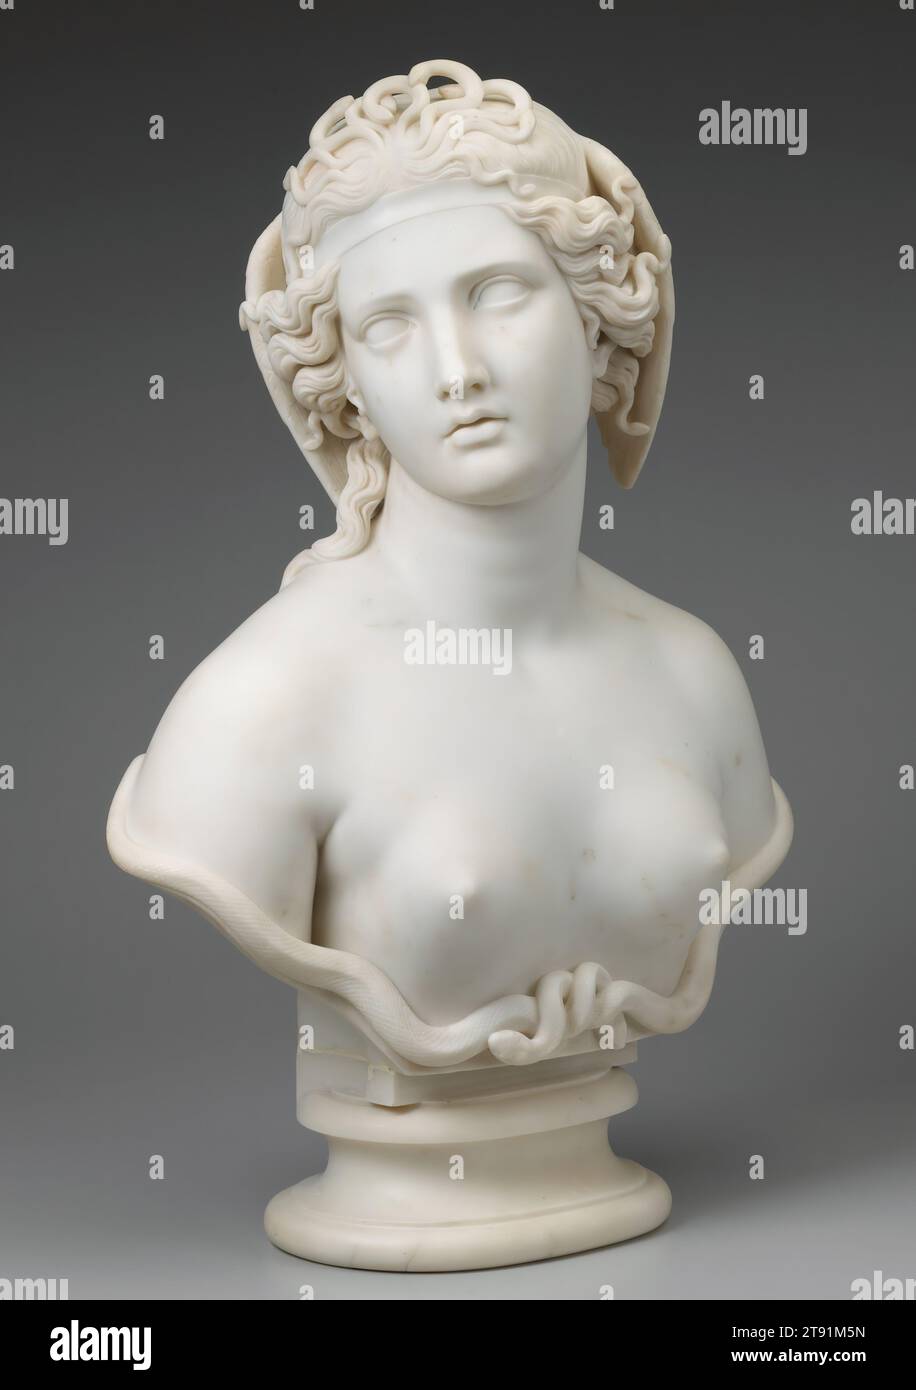 Medusa, c. 1854, Harriet Goodhue Hosmer, American, 1830-1908, 27 1/4 x 21 x 9 1/2 in. (69.22 x 53.34 x 24.13 cm), Marble, United States, 19th century, At a time when less than 1 percent of American women went to college, Harriet Goodhue Hosmer studied anatomy and moved to Rome to study sculpture. In 1858 she established her own sculpture studio in Rome, leading a team of more than twenty men. Hosmer often depicted strong female figures. In Greek mythology, Medusa was a beautiful woman whom the gods transformed into a Gorgon, a creature with snakes for hair Stock Photo